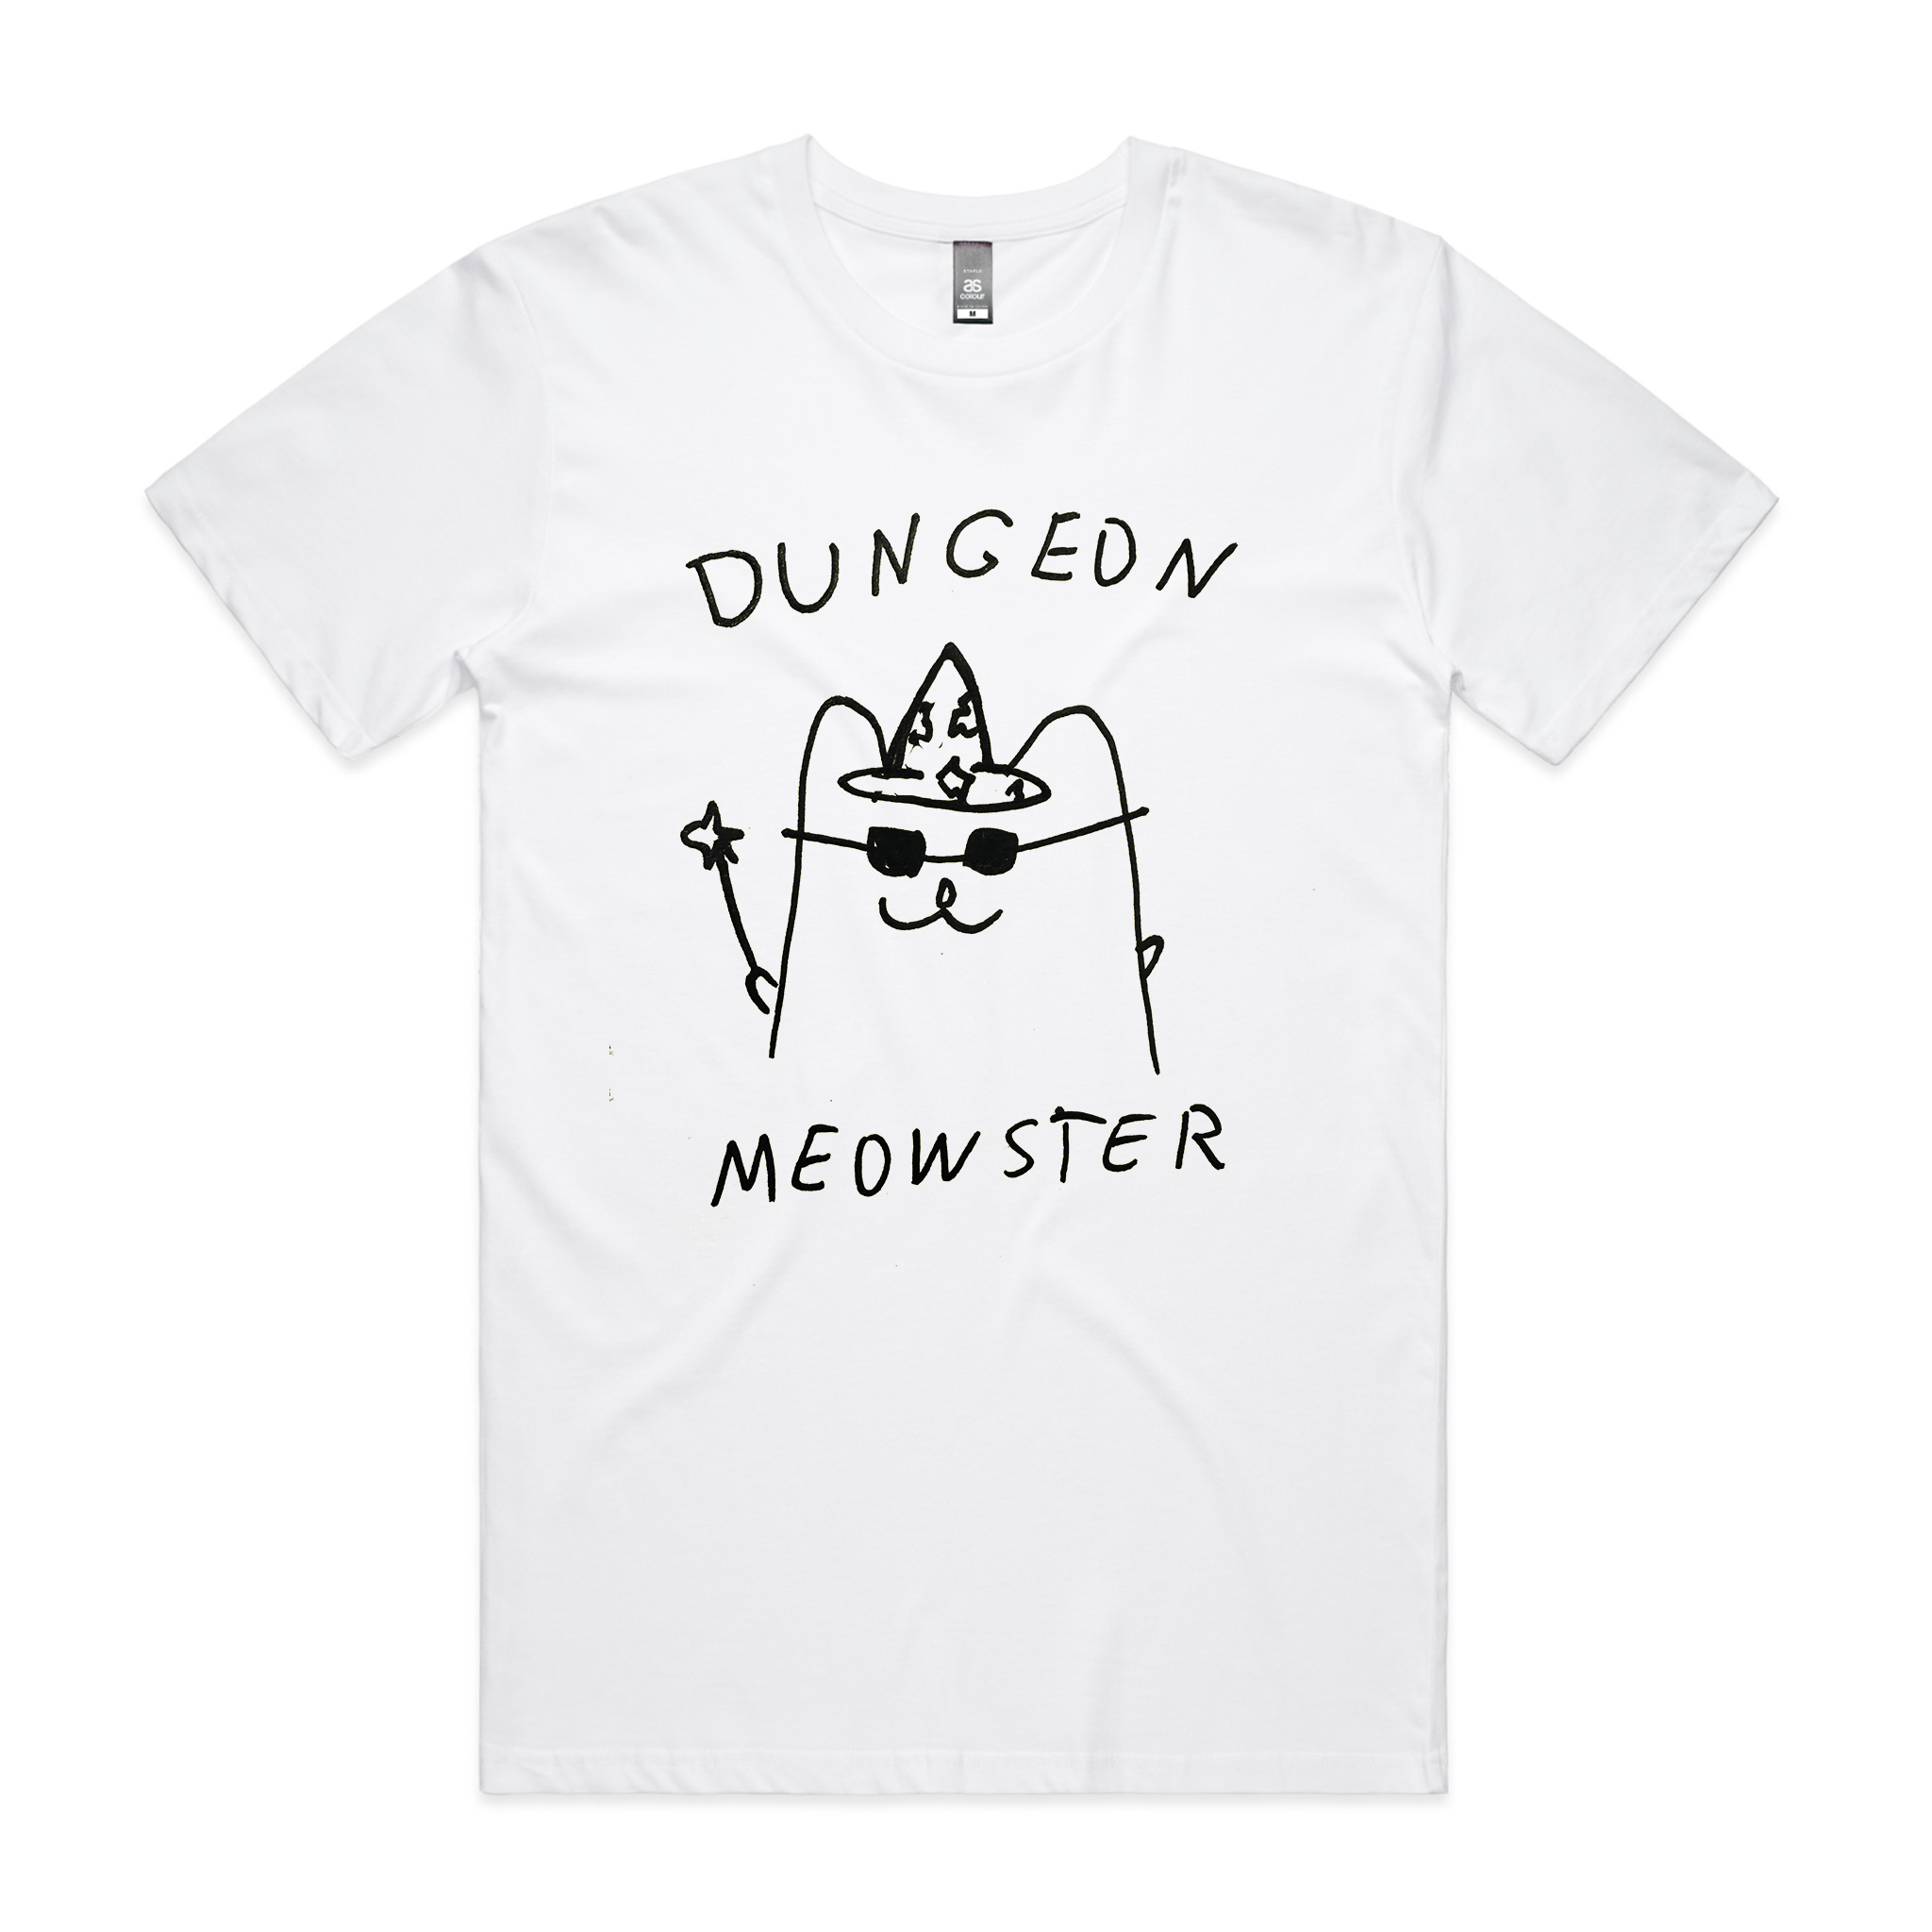 Dungeon Meowster Tee